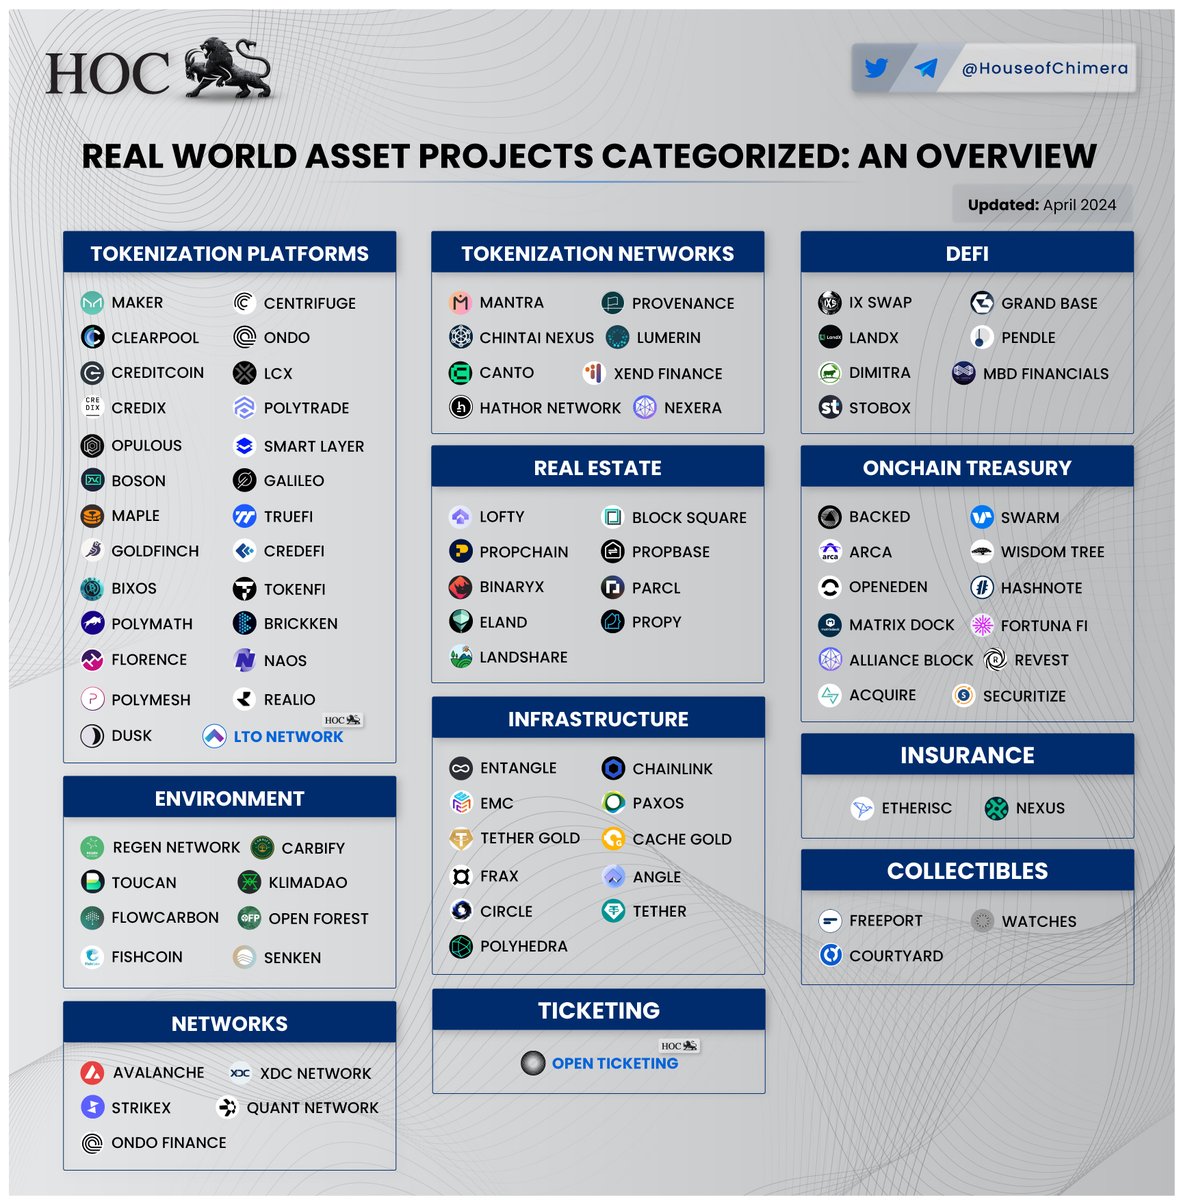 Real World Asset (RWA) Projects Categorized: An Overview 🔹The RWA industry is flourishing, with more and more traditional financial institutions (e.g. Blackrock, Citibank) experimenting with tokenization of assets 🔸The Web3 industry has an incredible set of innovative projects